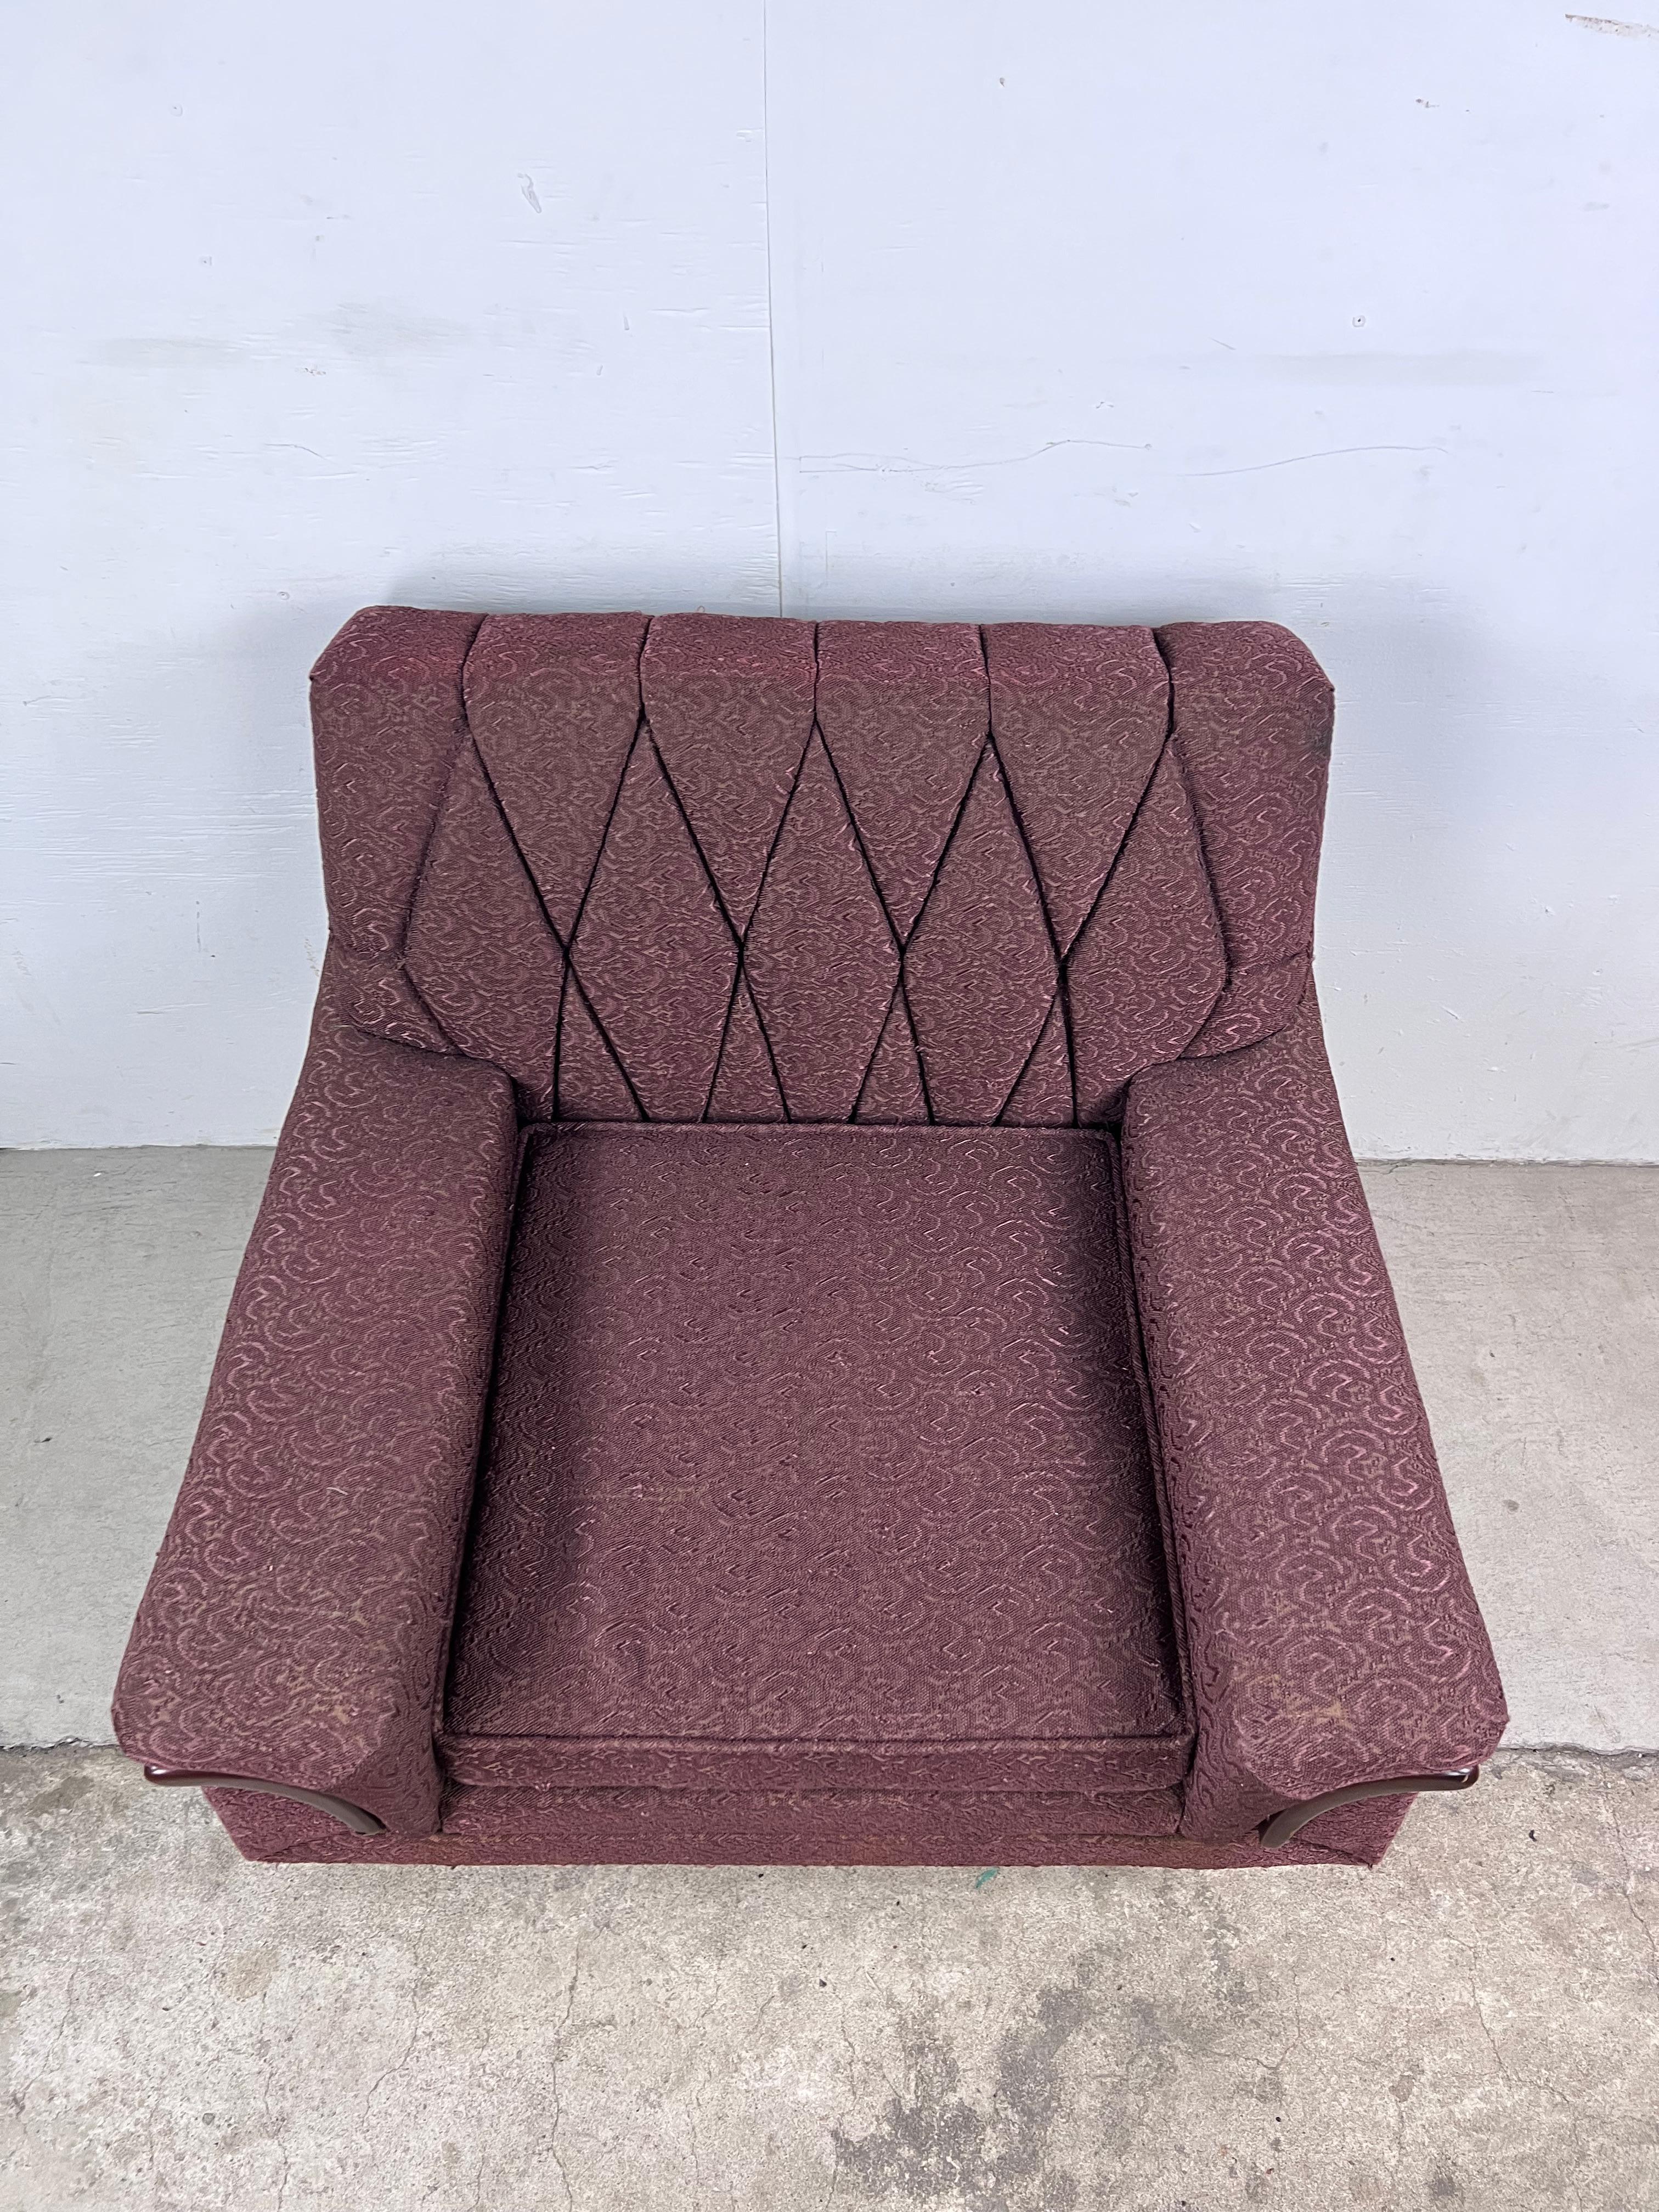 American Mid Century Modern Lounge Chair with Brown Upholstery For Sale